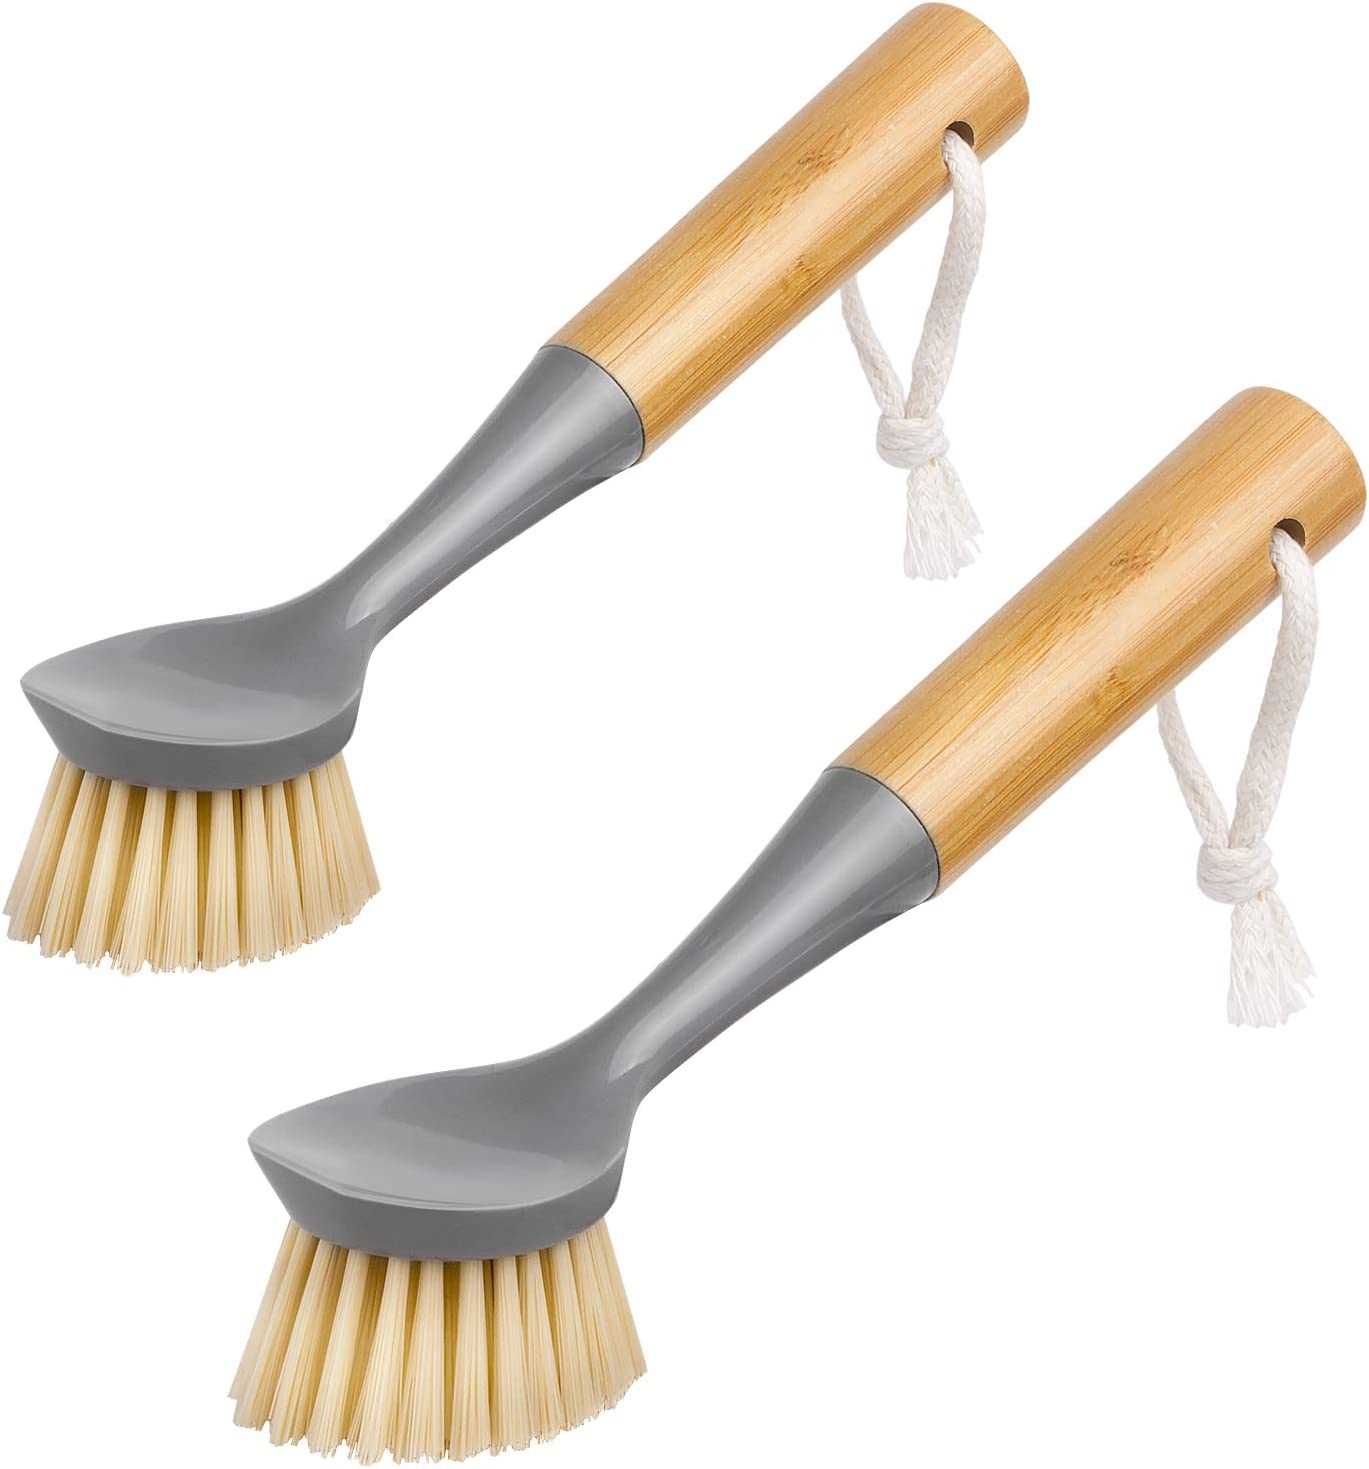 2x Dish Brush with Bamboo Handle Built-in Scraper Scrubbing Brush for Pans Pots Kitchen Sink Cleaning